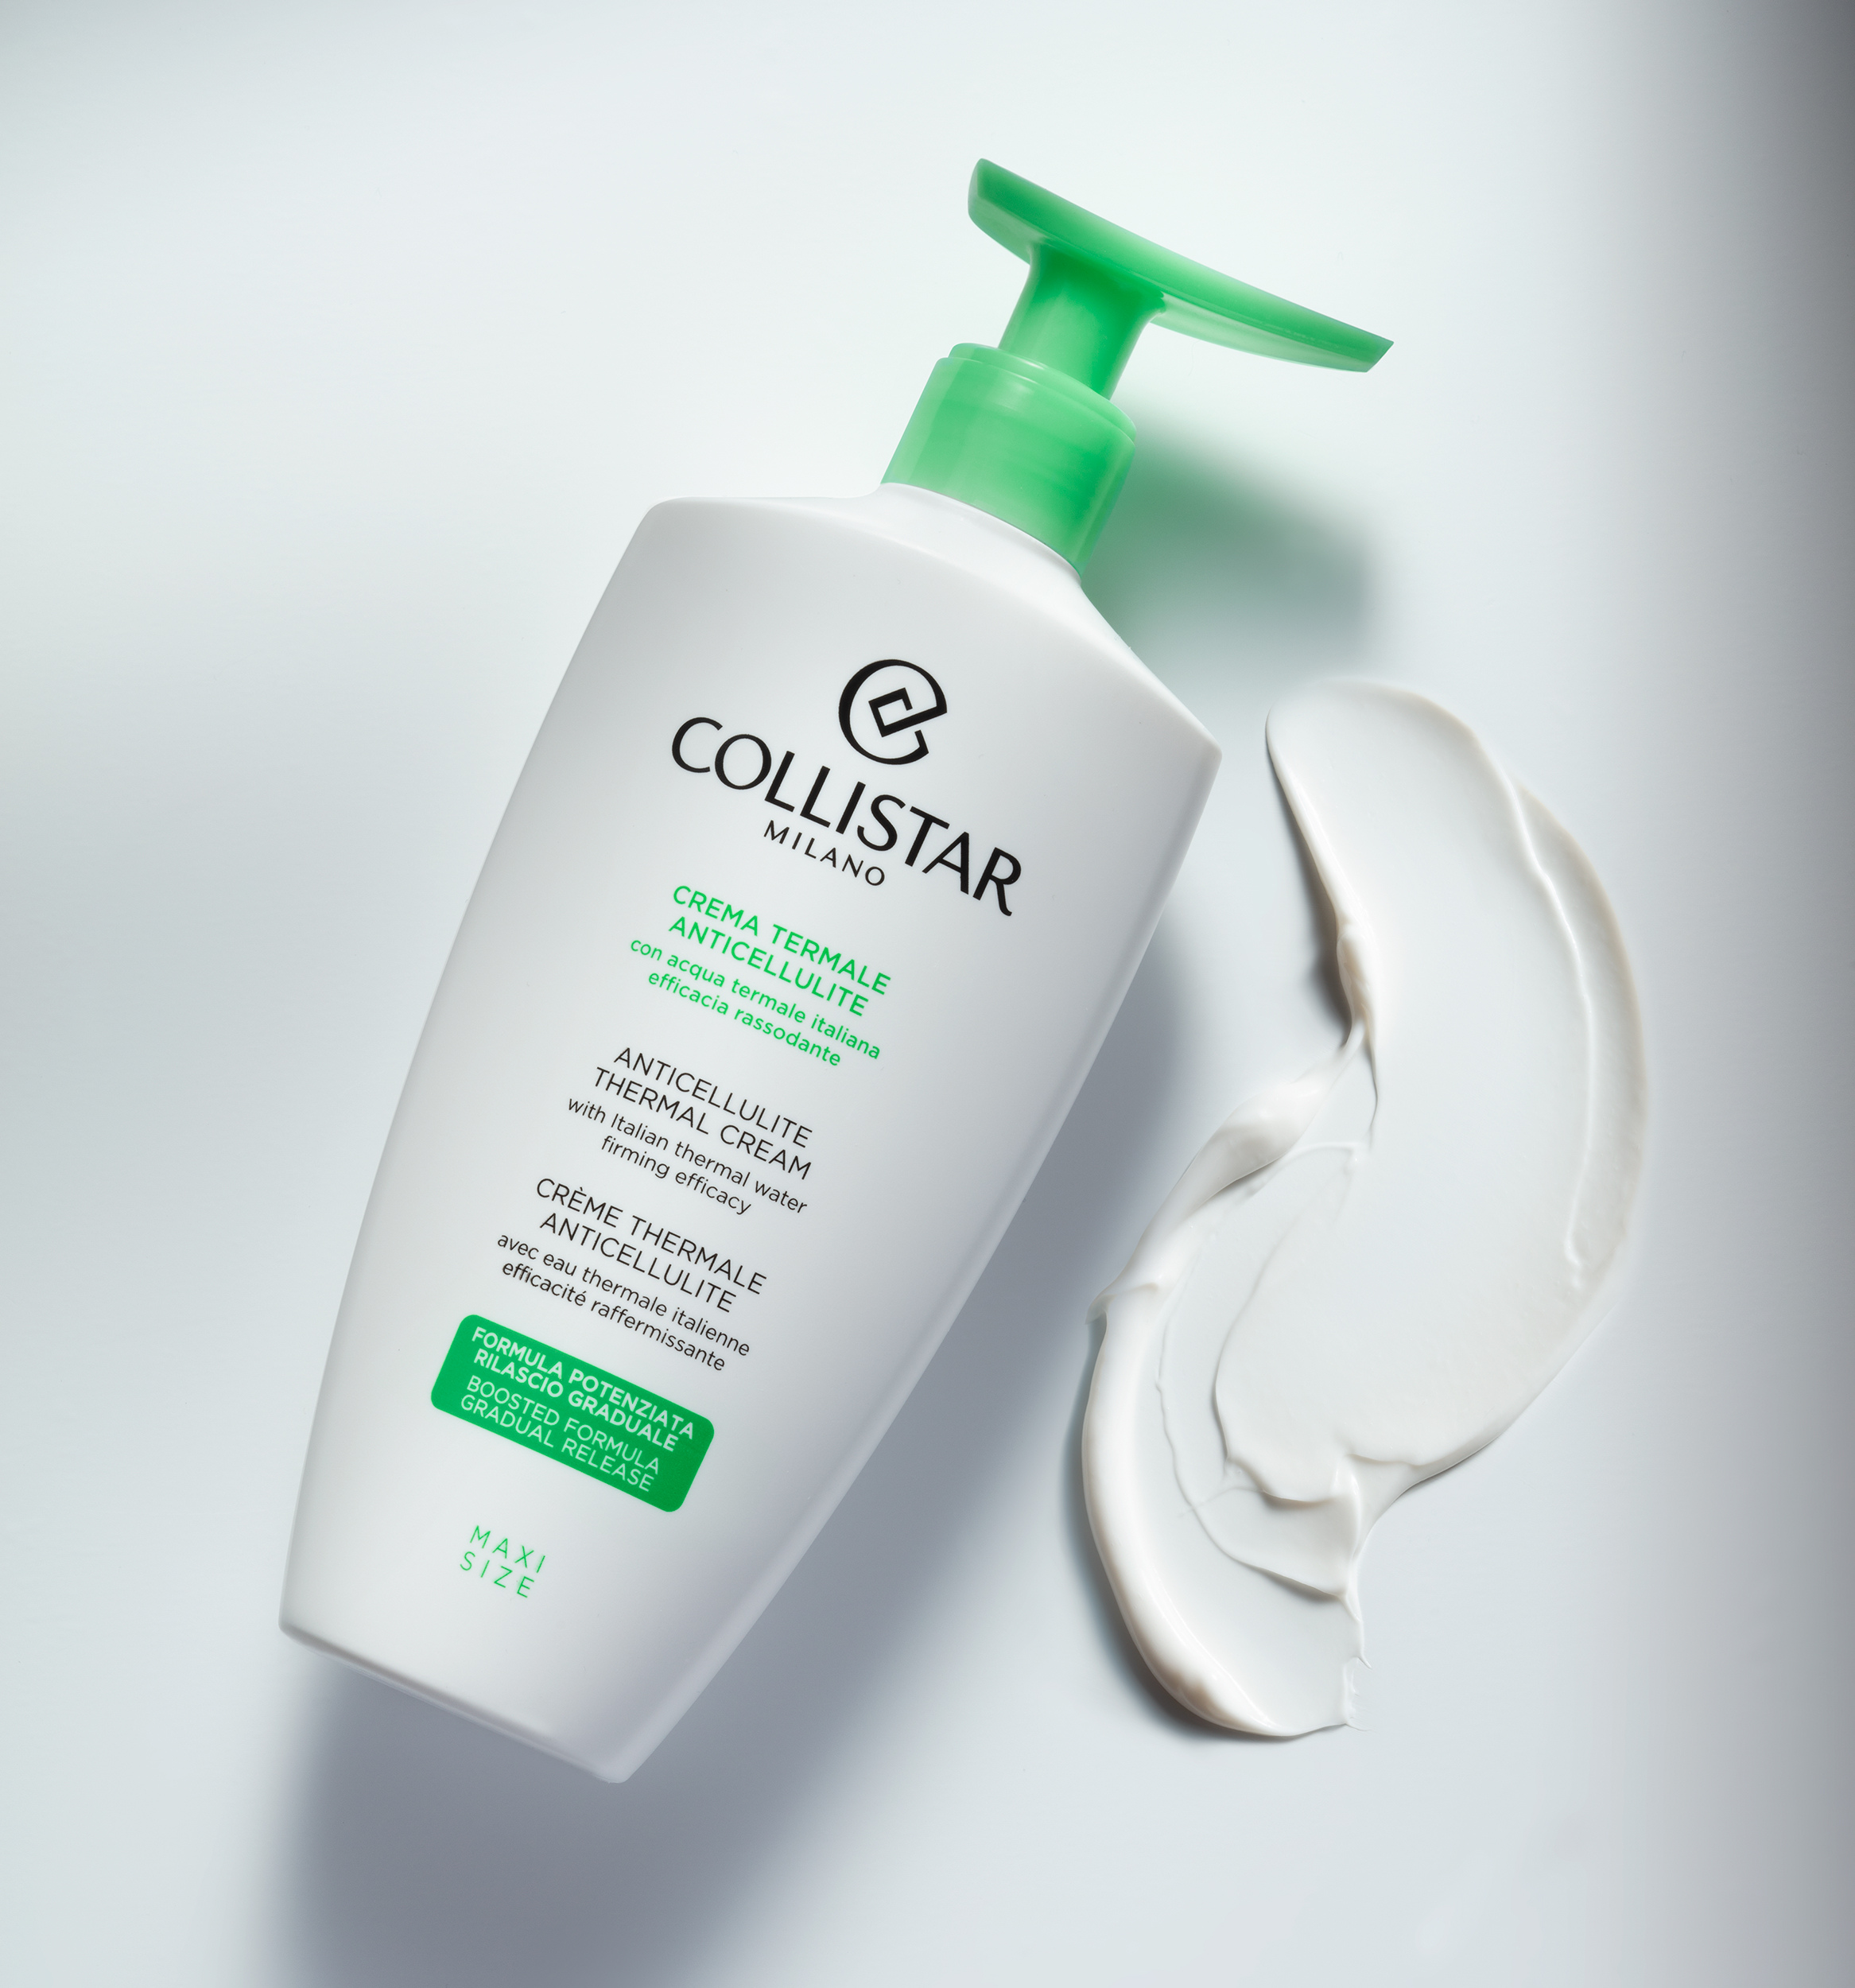 ANTICELLULITE* THERMAL CREAM by Collistar